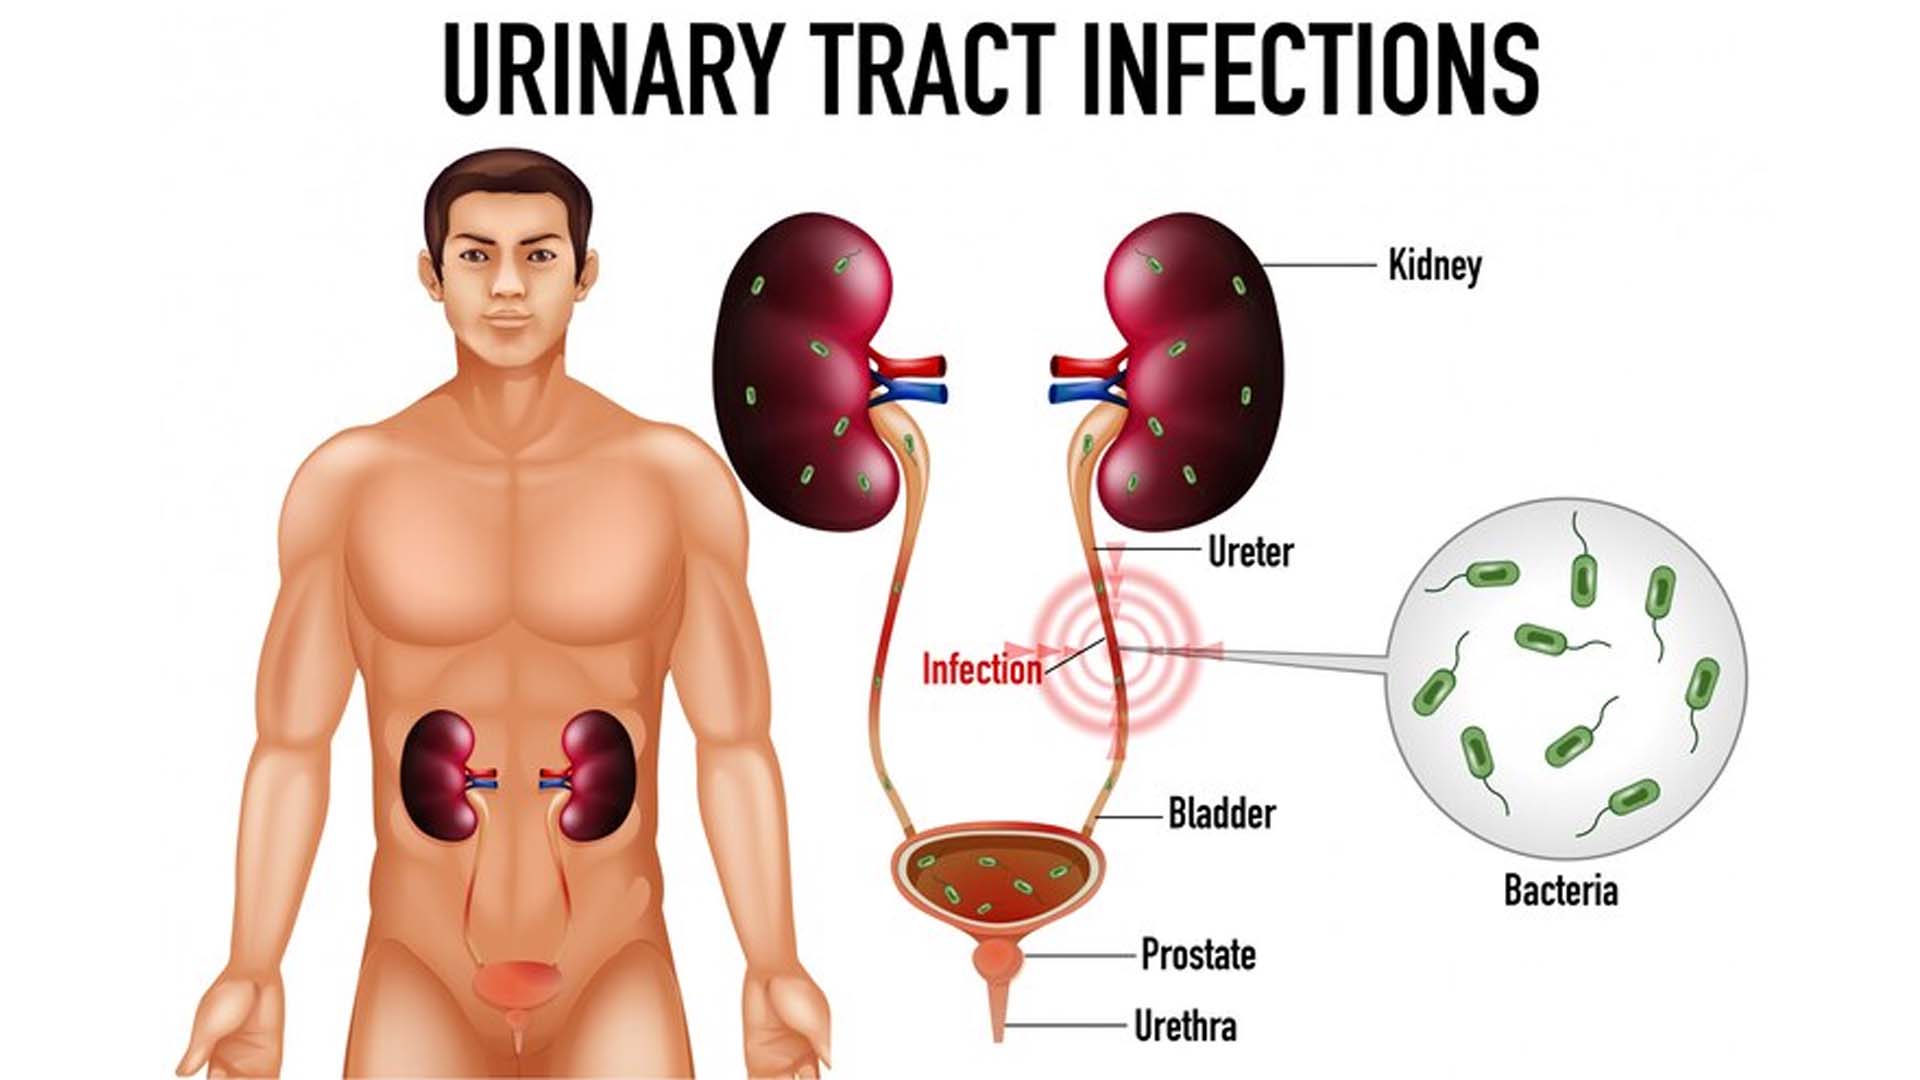 Urinary Tract Infections (UTIs) in males